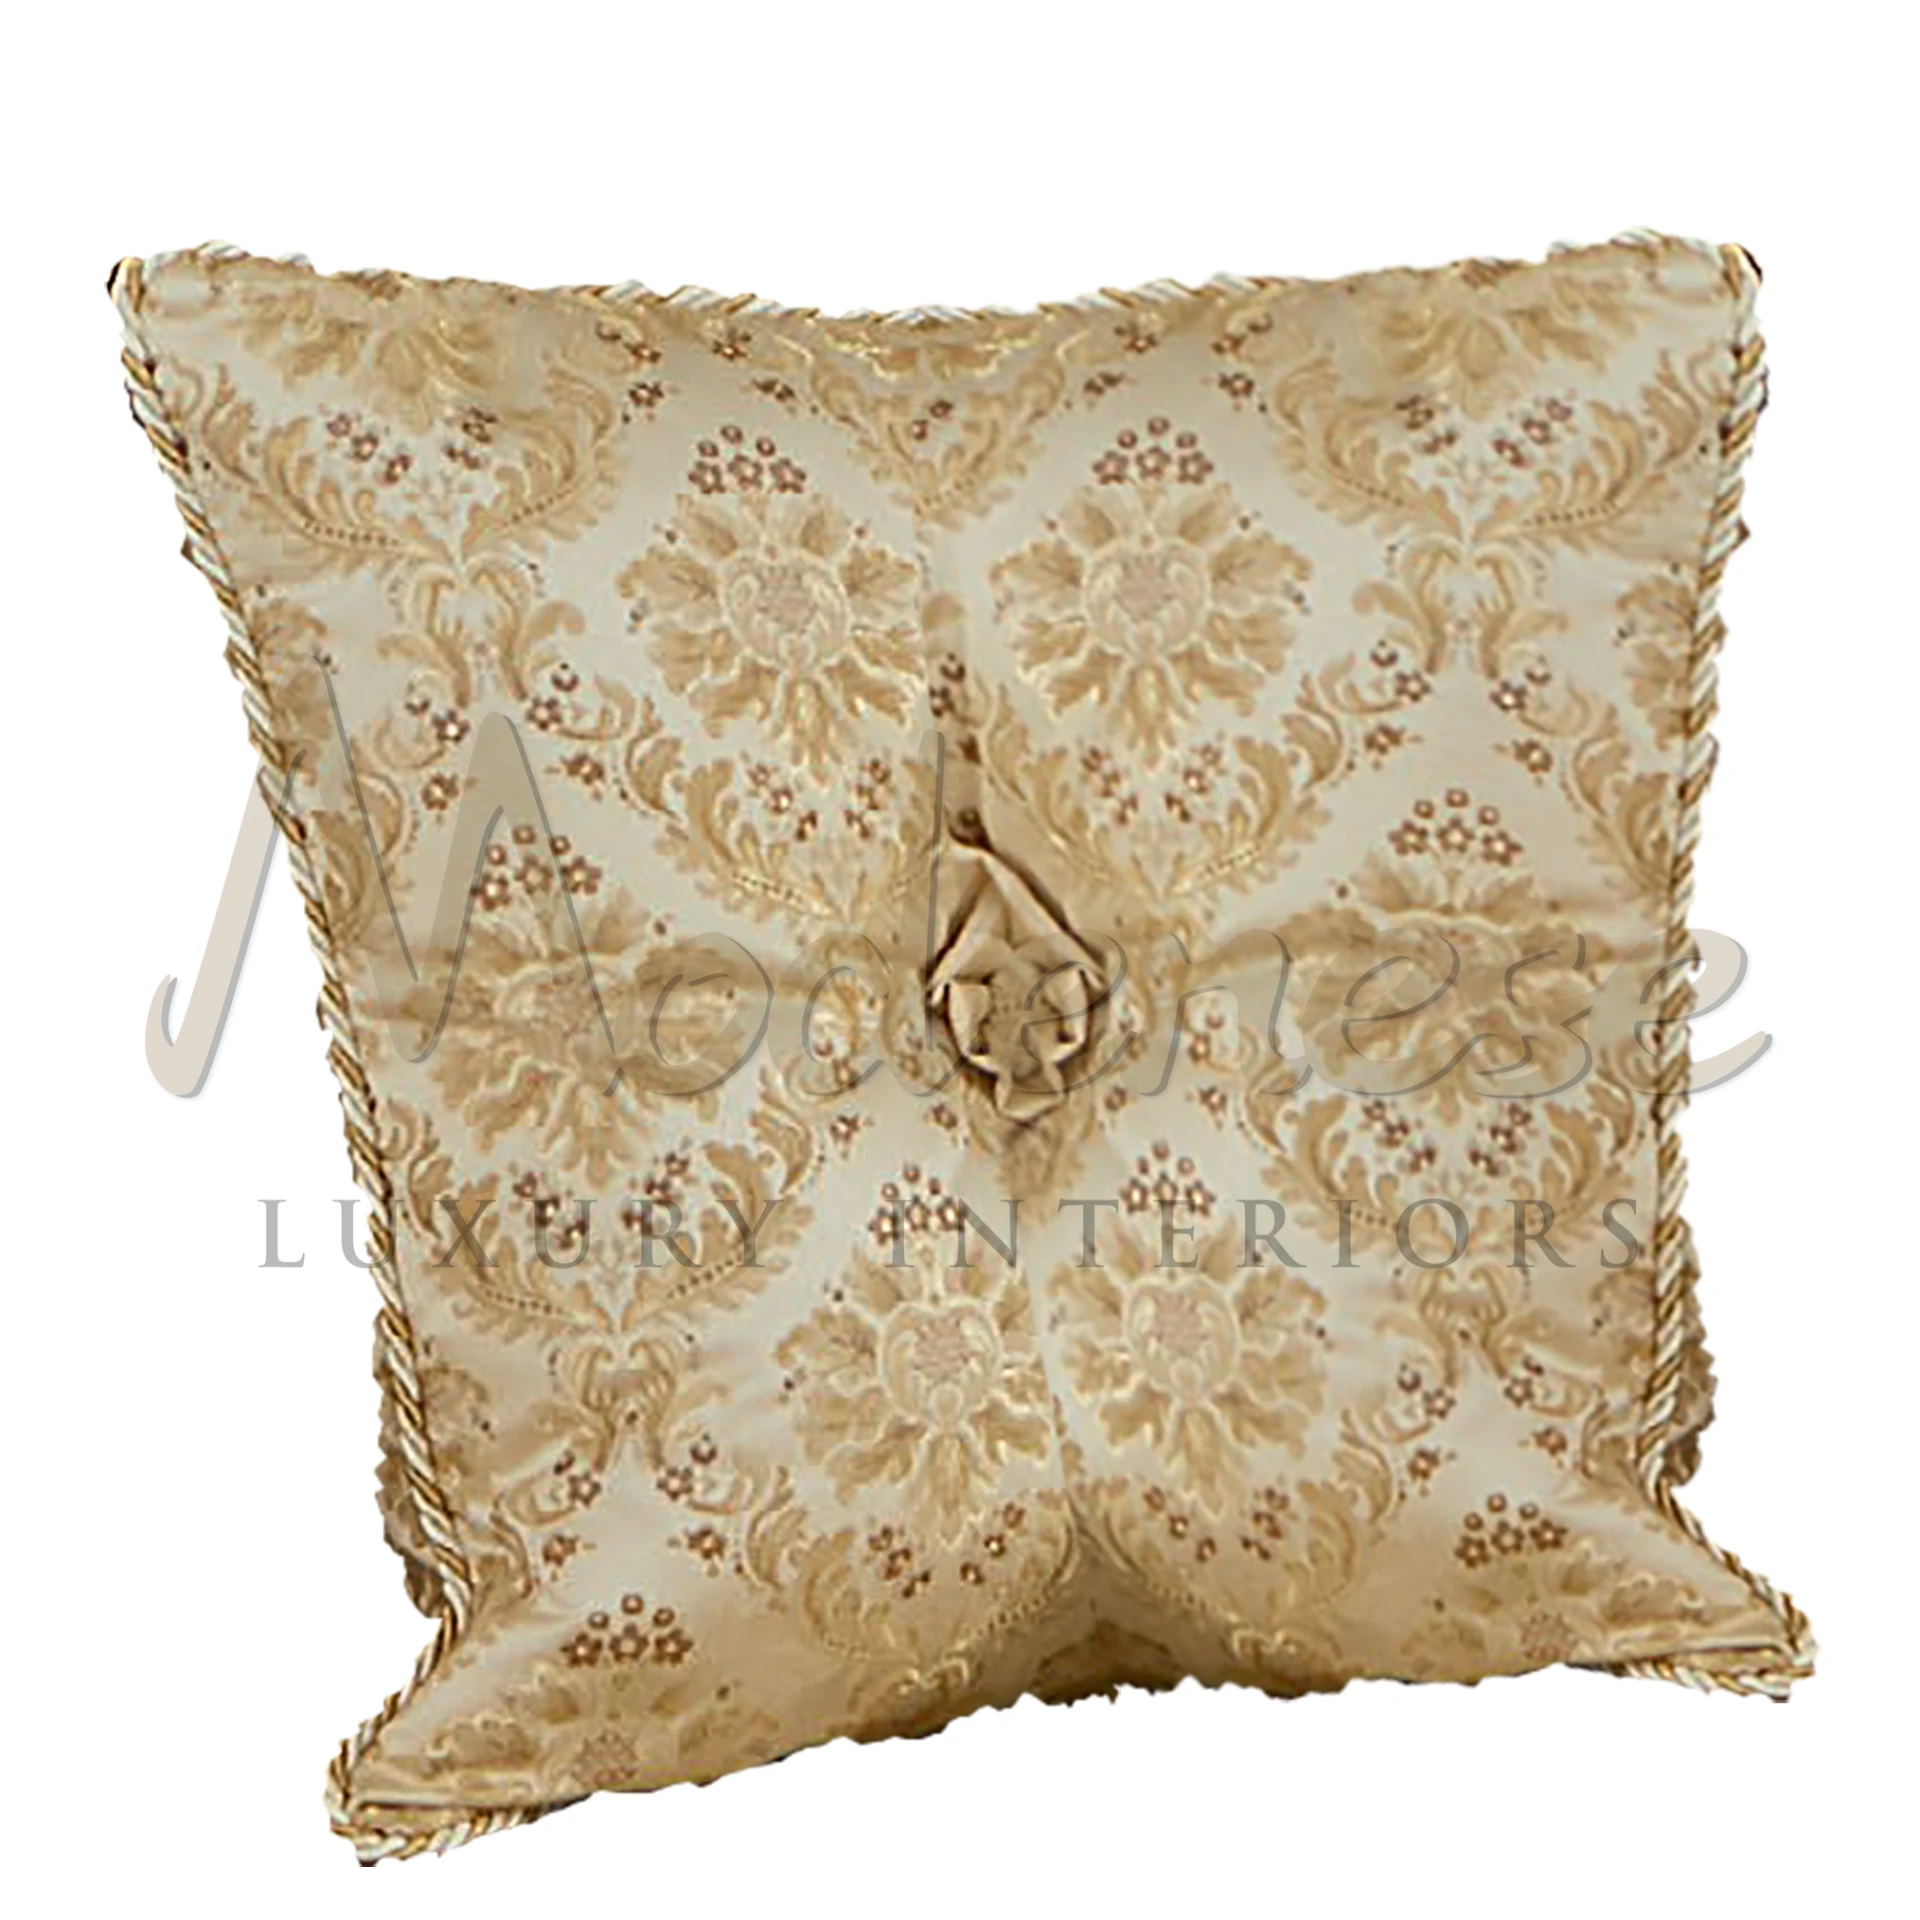 Well-constructed Imperial Beige Pillow, maintaining shape and beauty, perfect for adding enduring elegance to any living space.